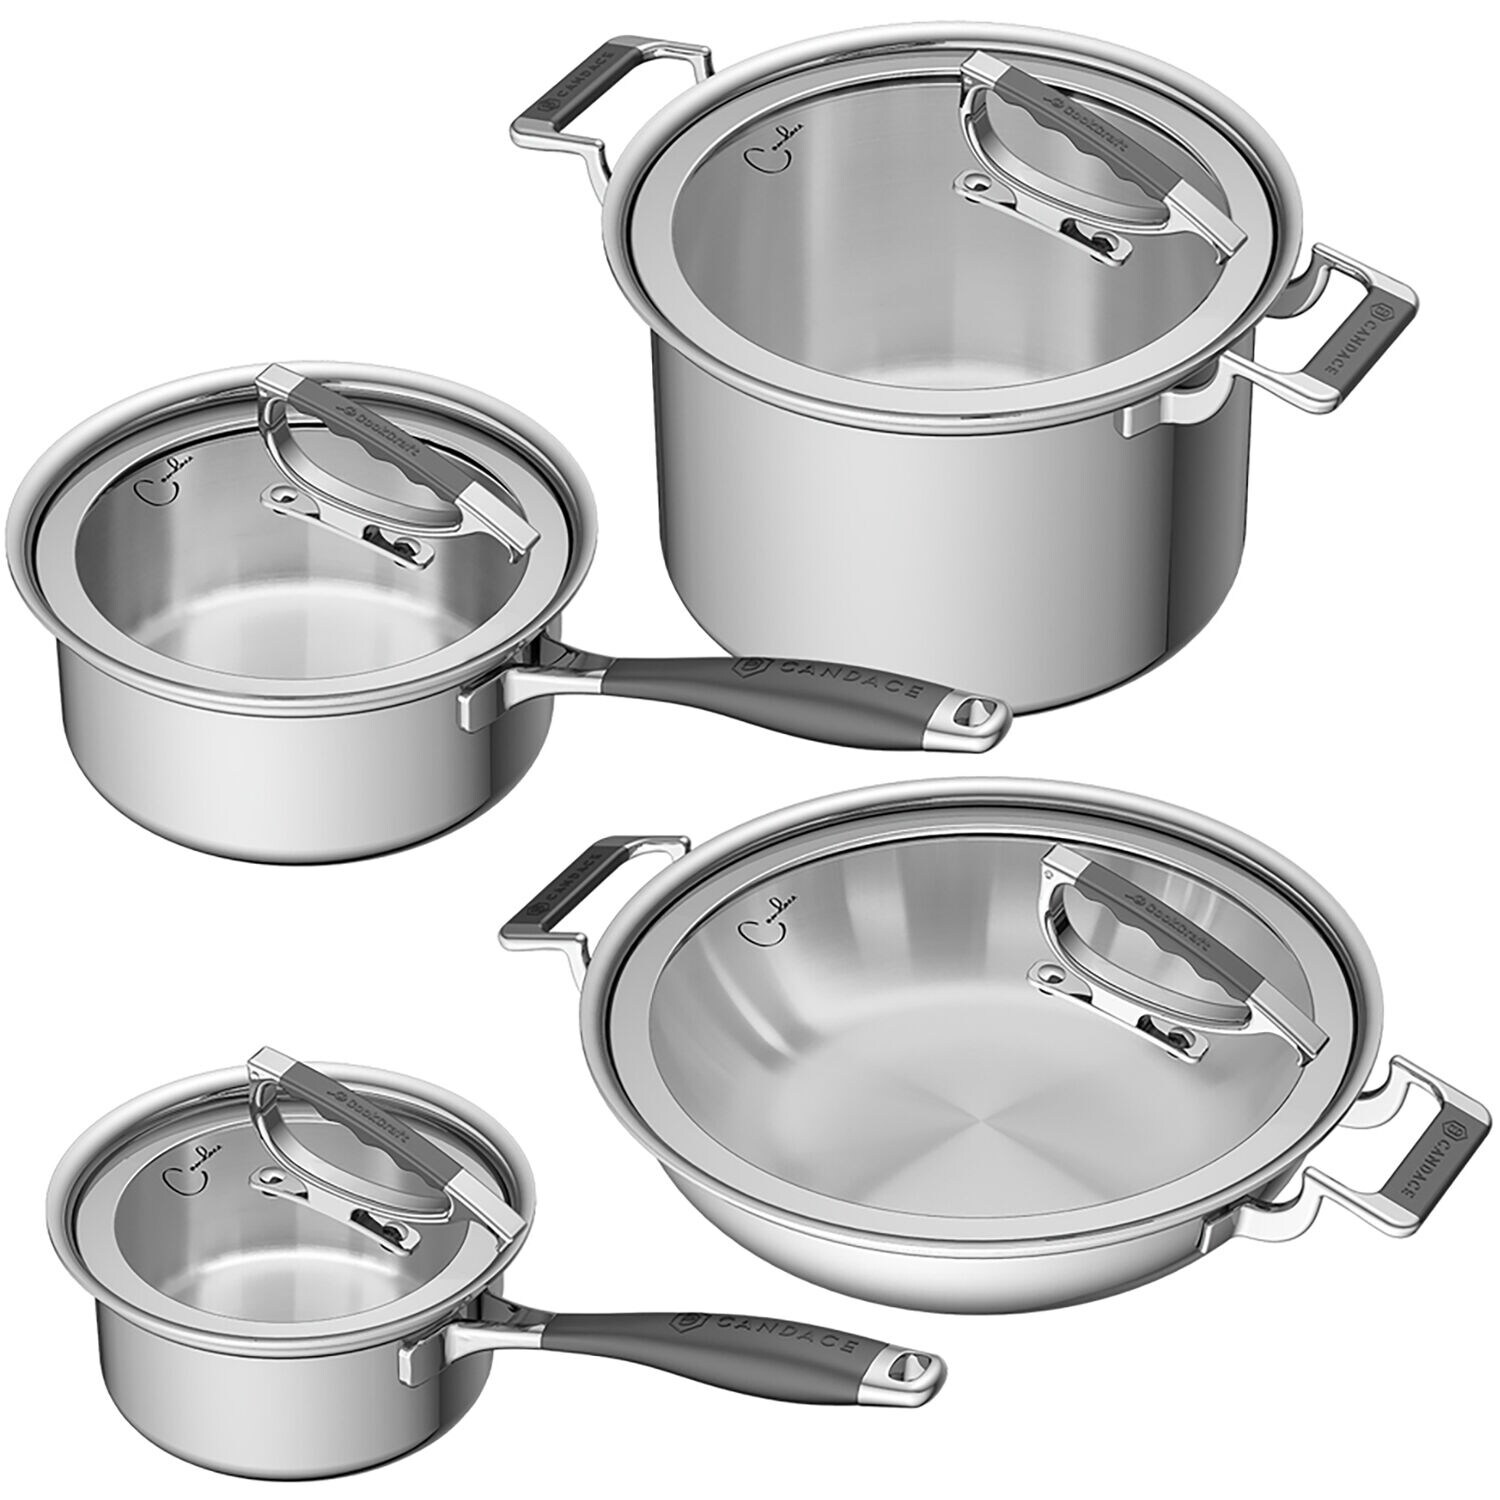 https://ak1.ostkcdn.com/images/products/is/images/direct/1d2a614634c7b341942037a0a2648e2d3bd76c15/CookCraft-by-Candace-8-Piece-Tri-Ply-Stainless-Steel-Luxury-Cookware-Set.jpg